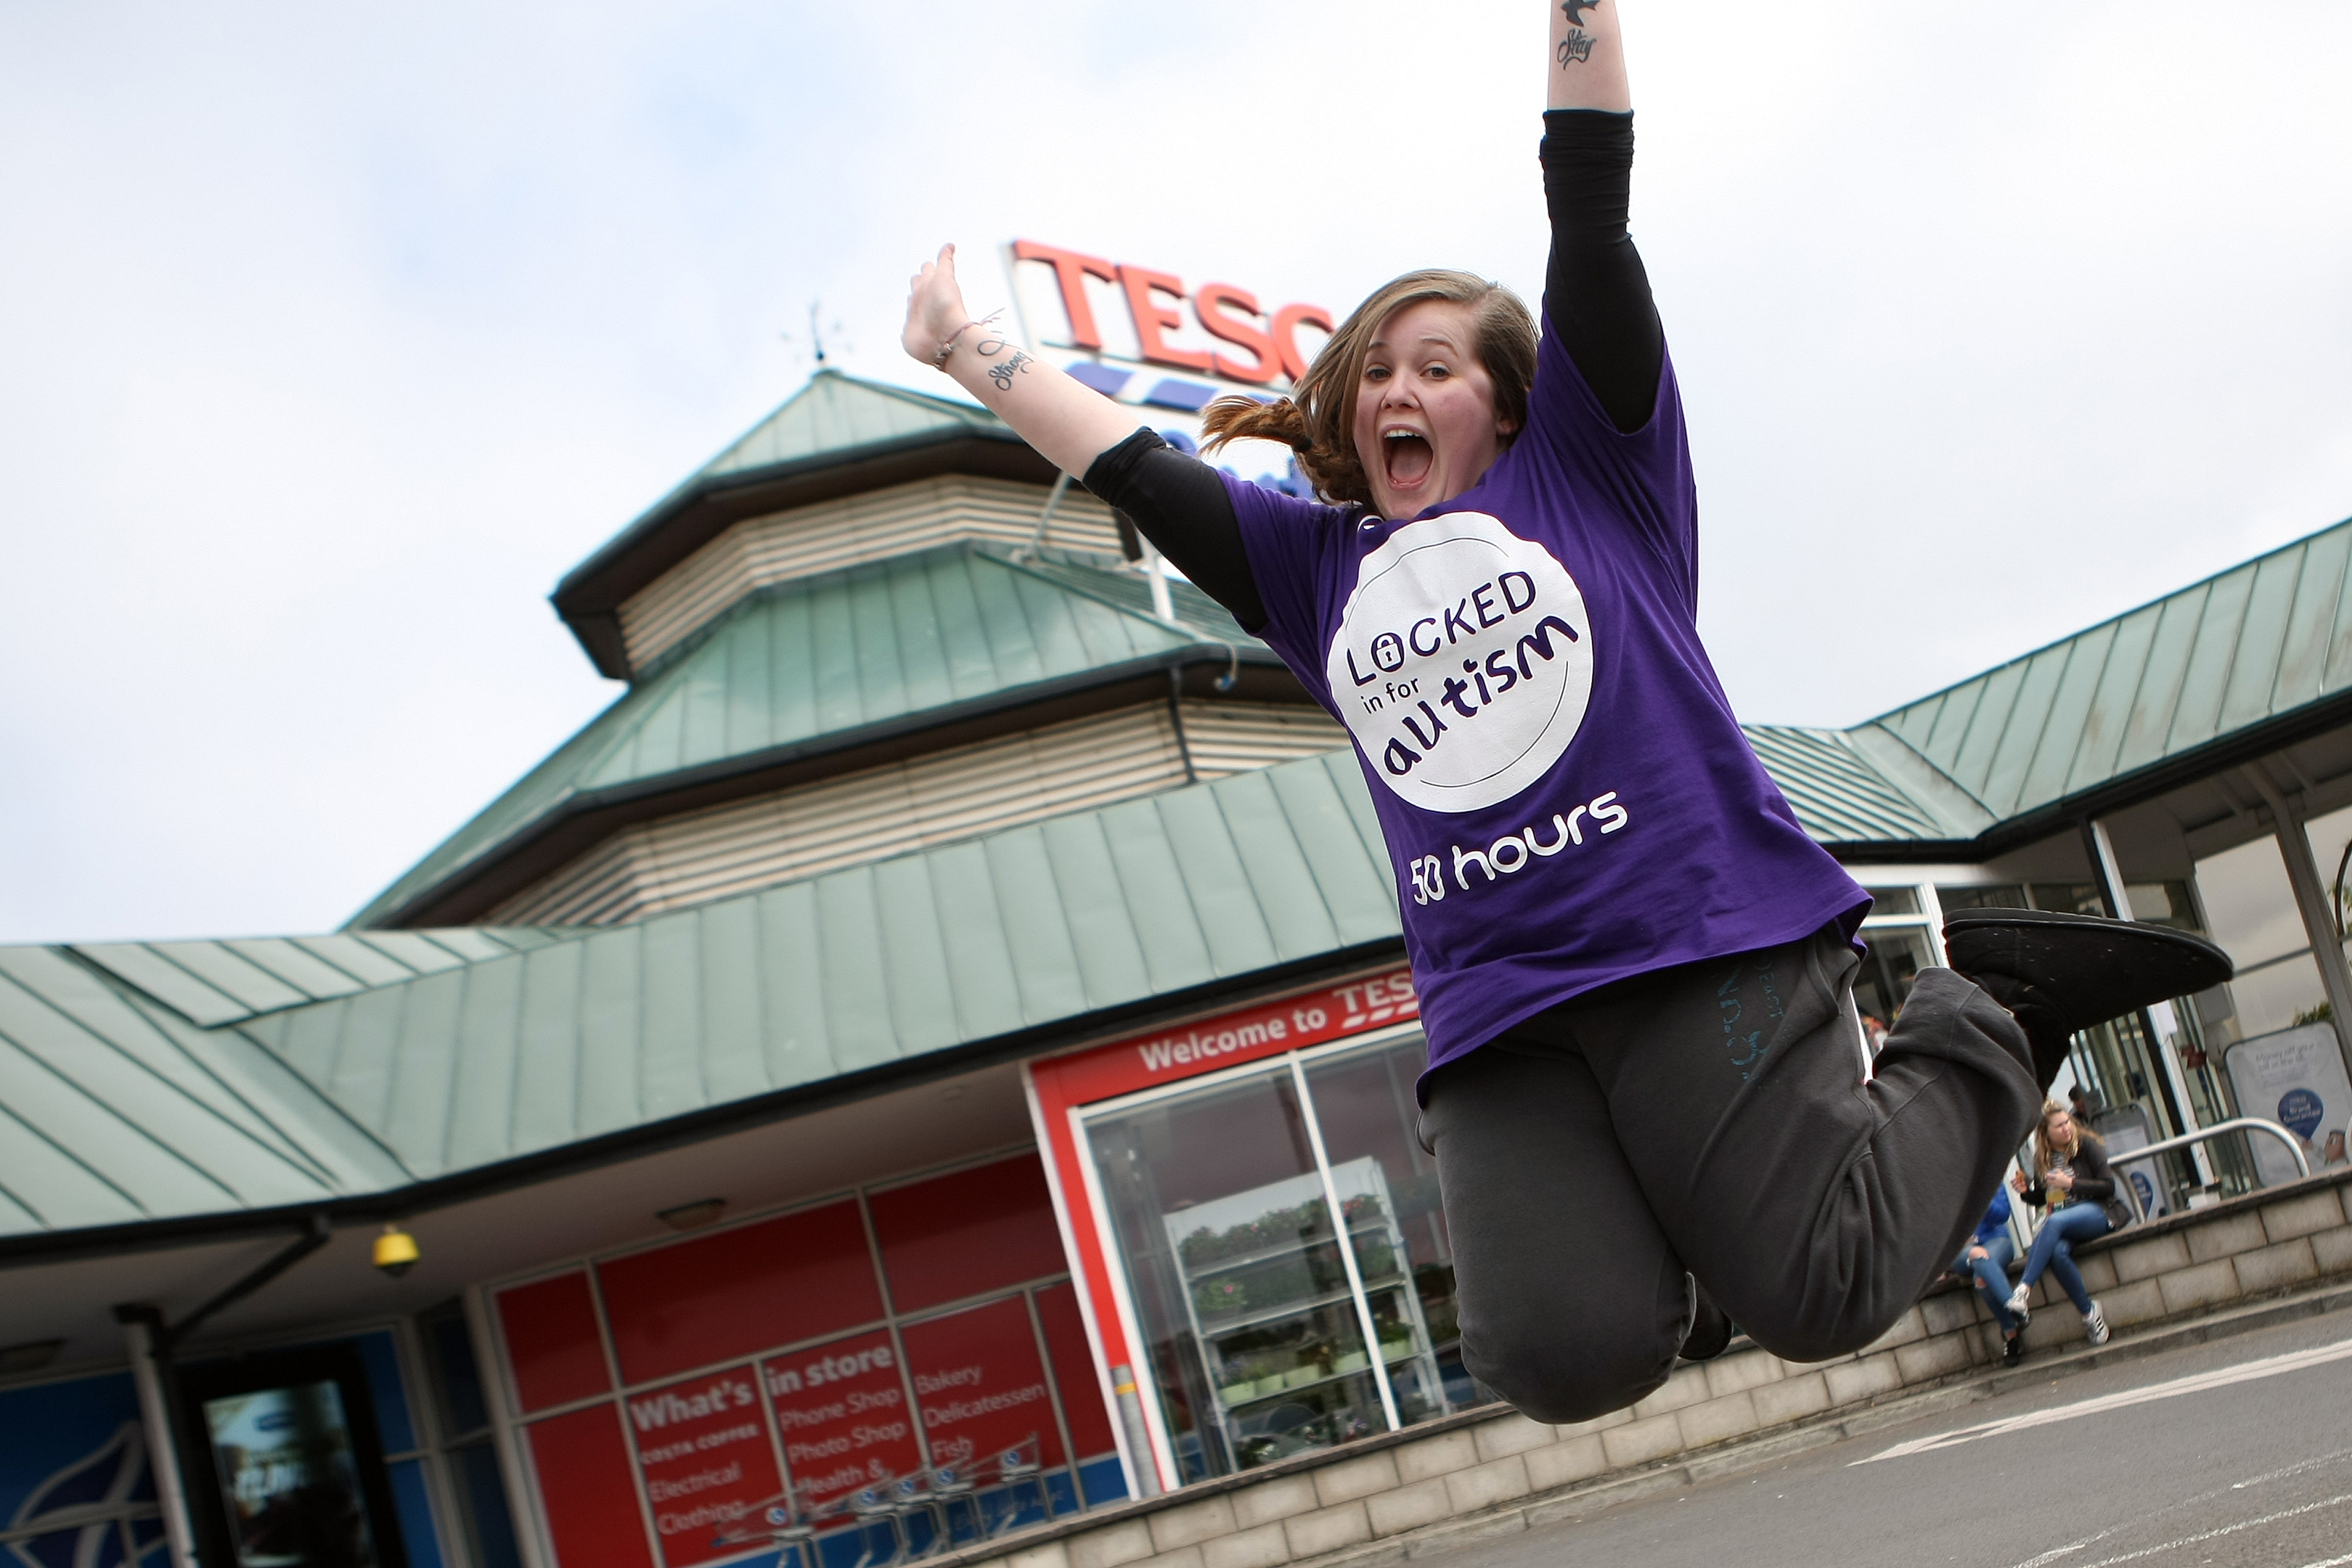 Meg jumps for joy after escaping her cell at Tesco Riverside.